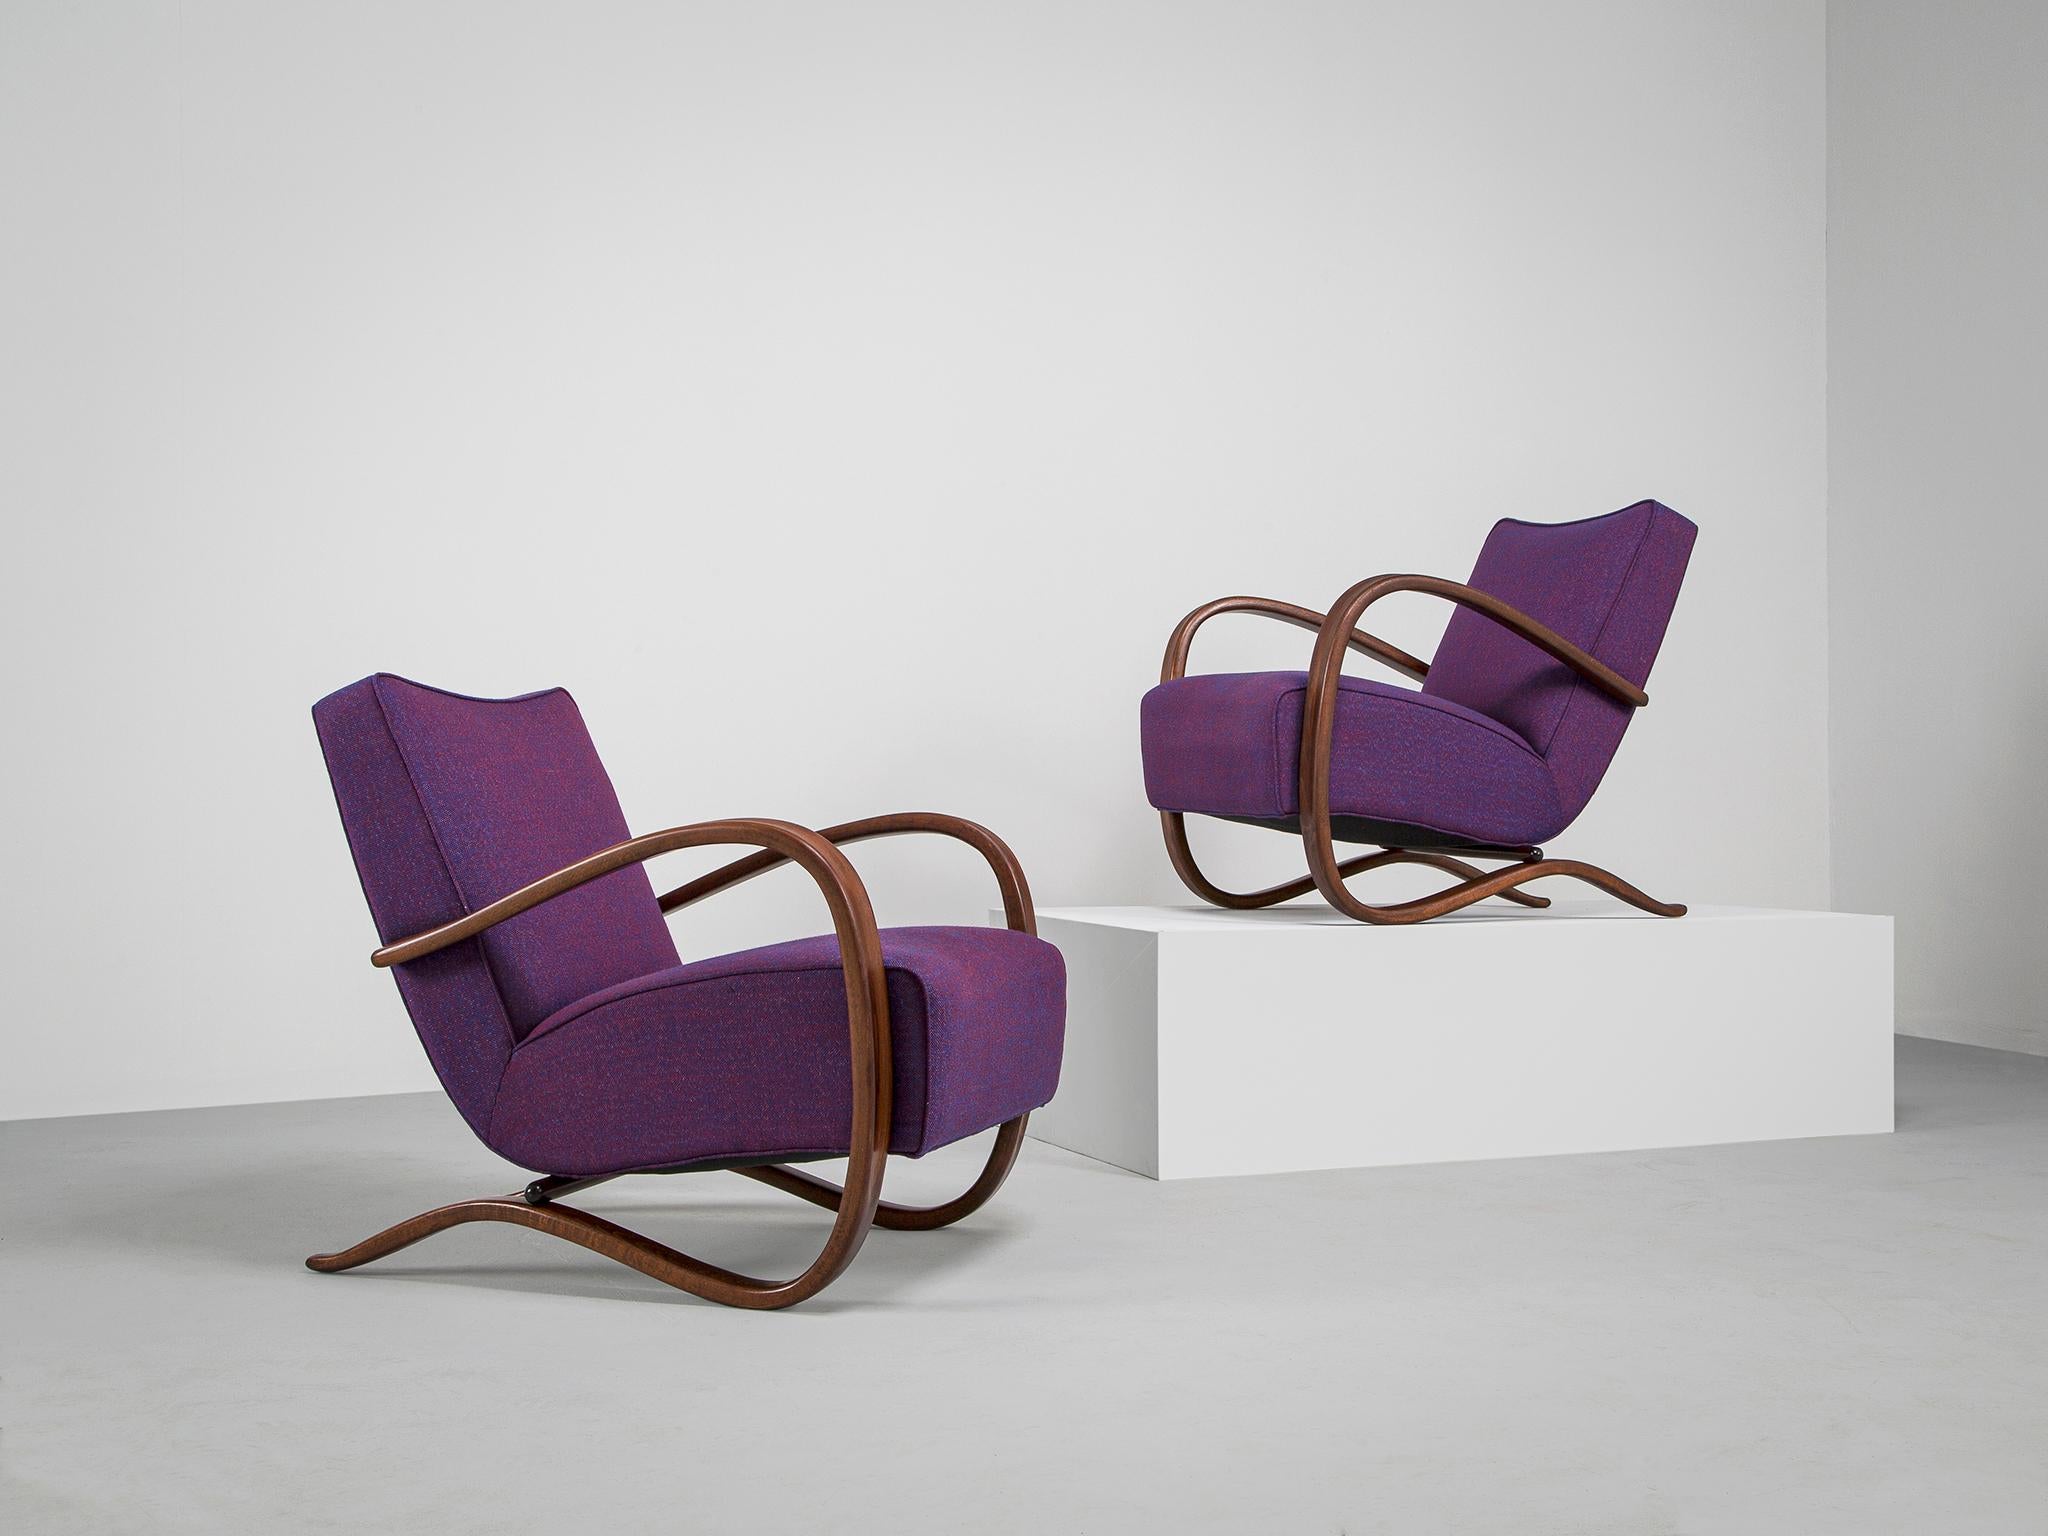 Jindrich Halabala, lounge chairs, purple kvadrat sunniva 0762 fabric and stained beech, Czech Republic, 1930s. 

These extraordinary pair of Halabala chairs are recently upholstered with a purple Kvadrat sunniva upholstery which is done in our own